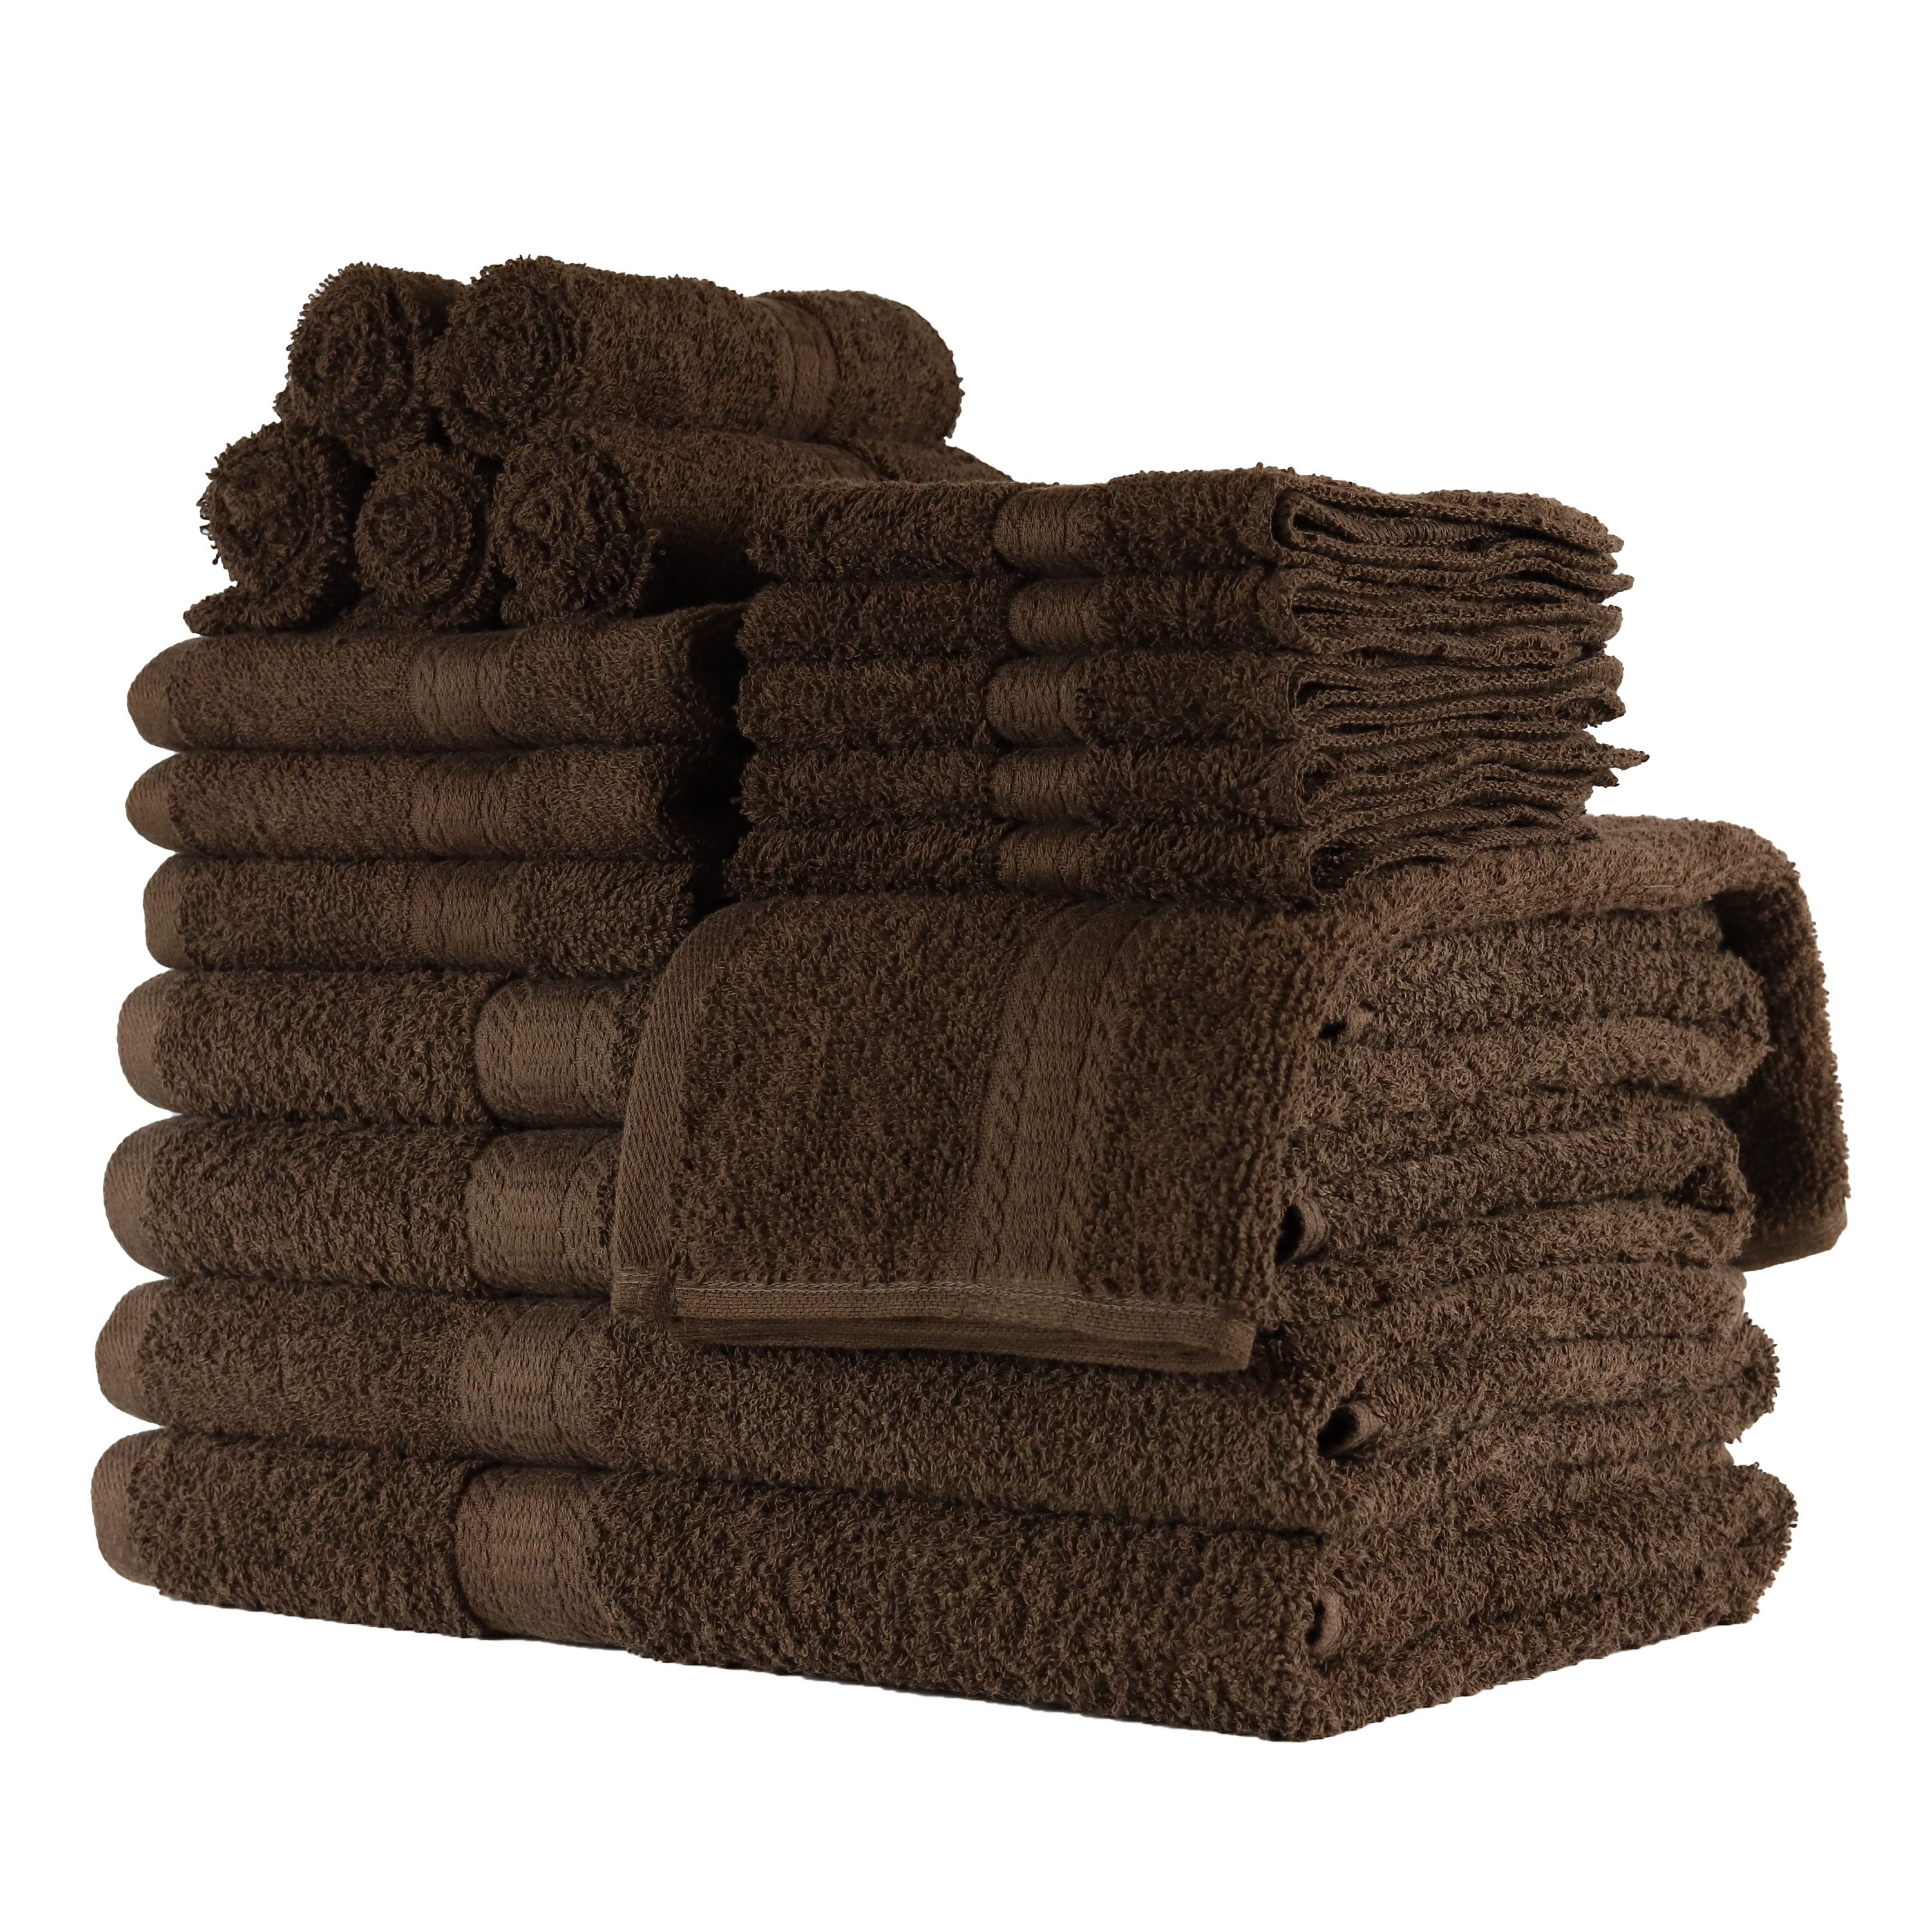 Mainstays Basic Solid 18-Piece Bath Towel Set Collection, Brown - image 7 of 10